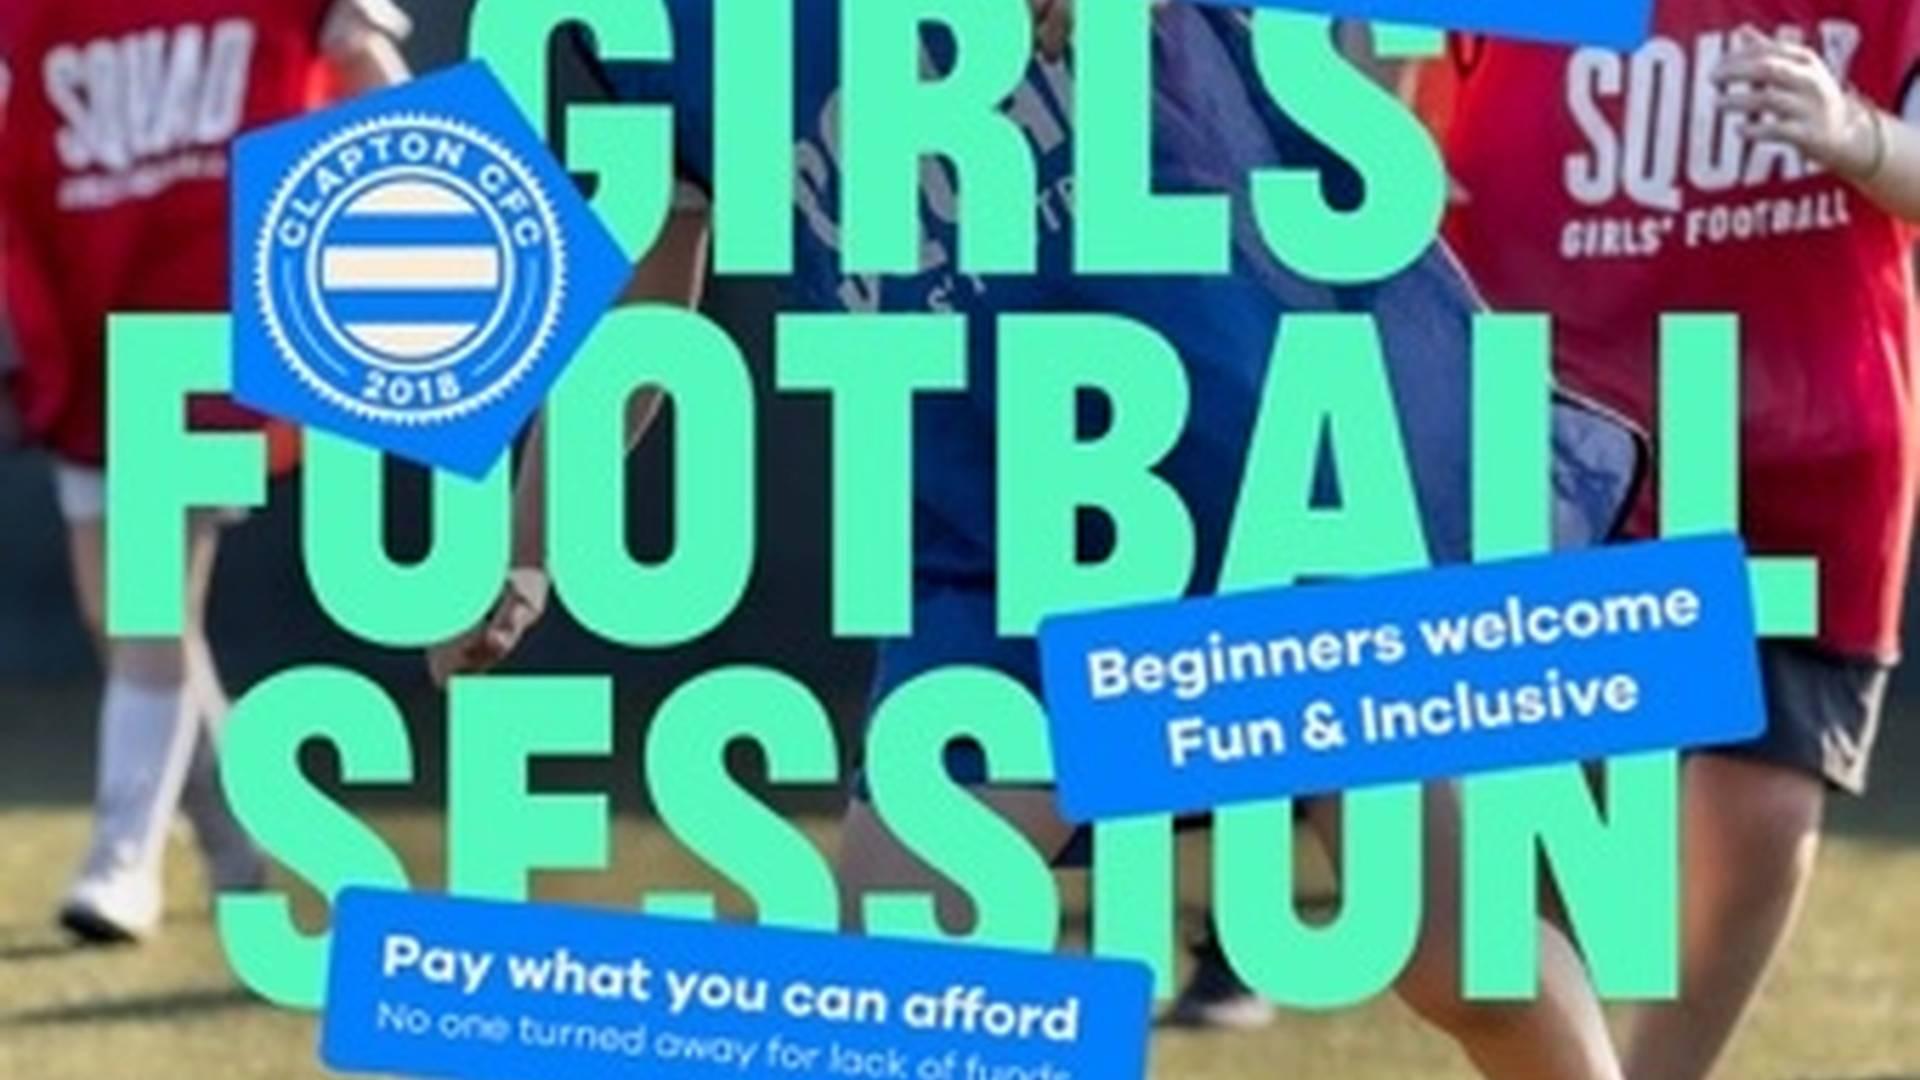 Girls Football Sessions photo